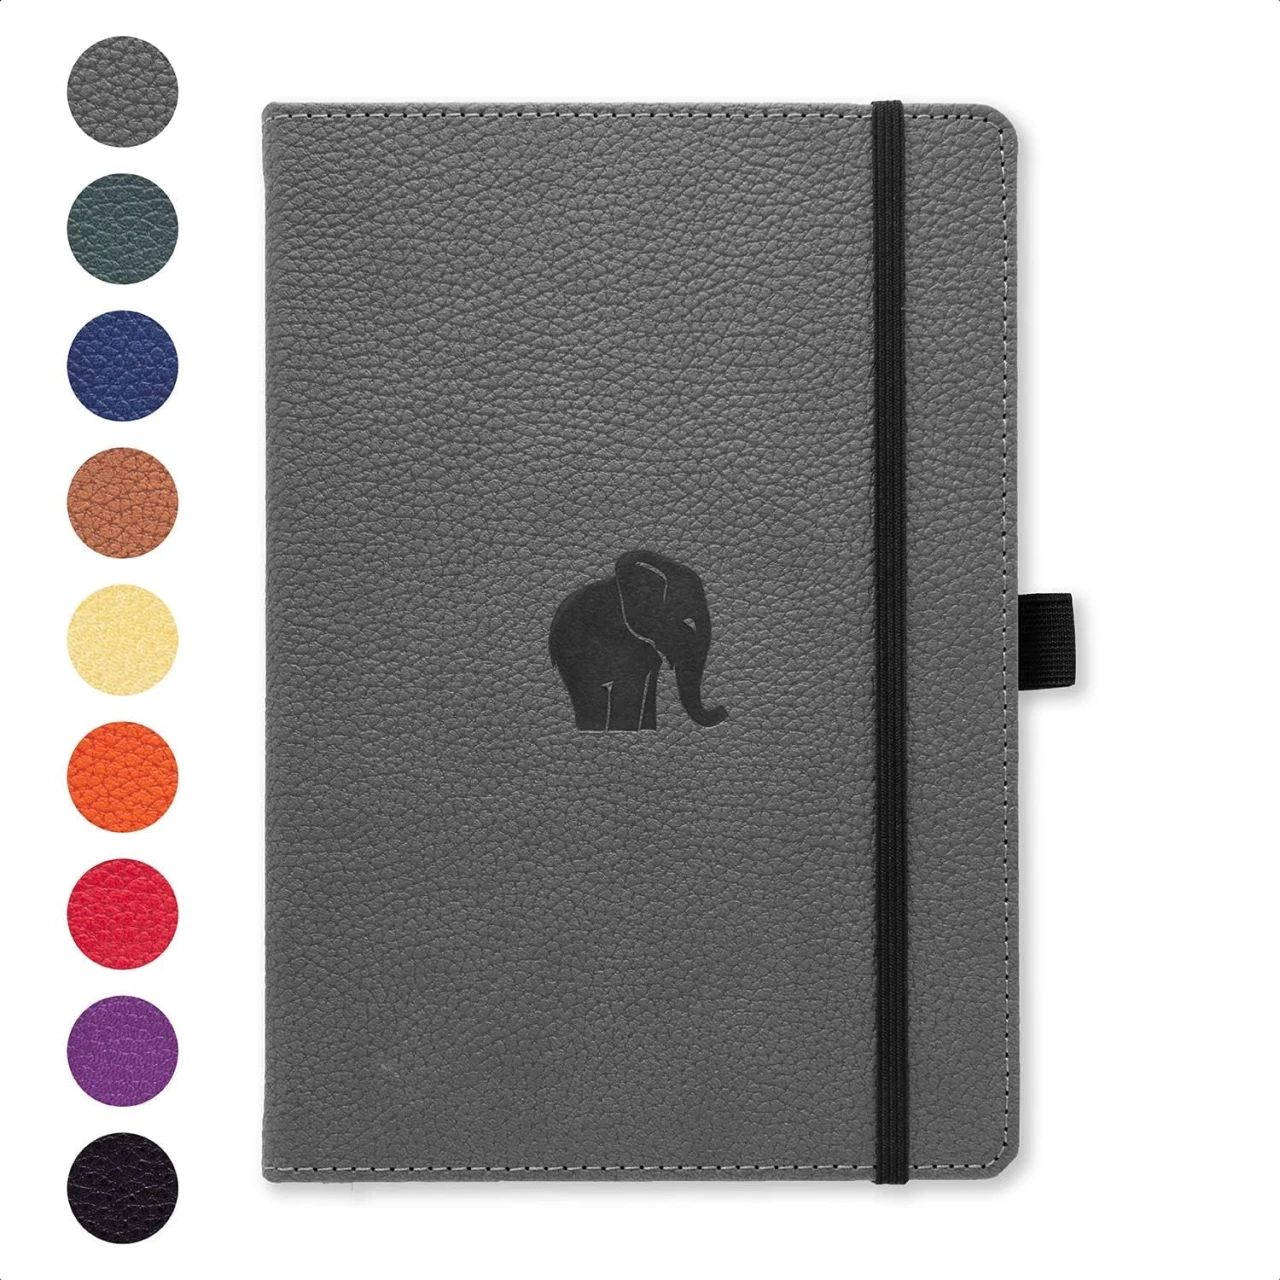 Dingbats A5 Wildlife Notebook Journal Hardcover, Cream 100gsm Ink-Proof Paper, 6.1 x 8.5 inches, 192 pages (Grey Elephant, Dotted)